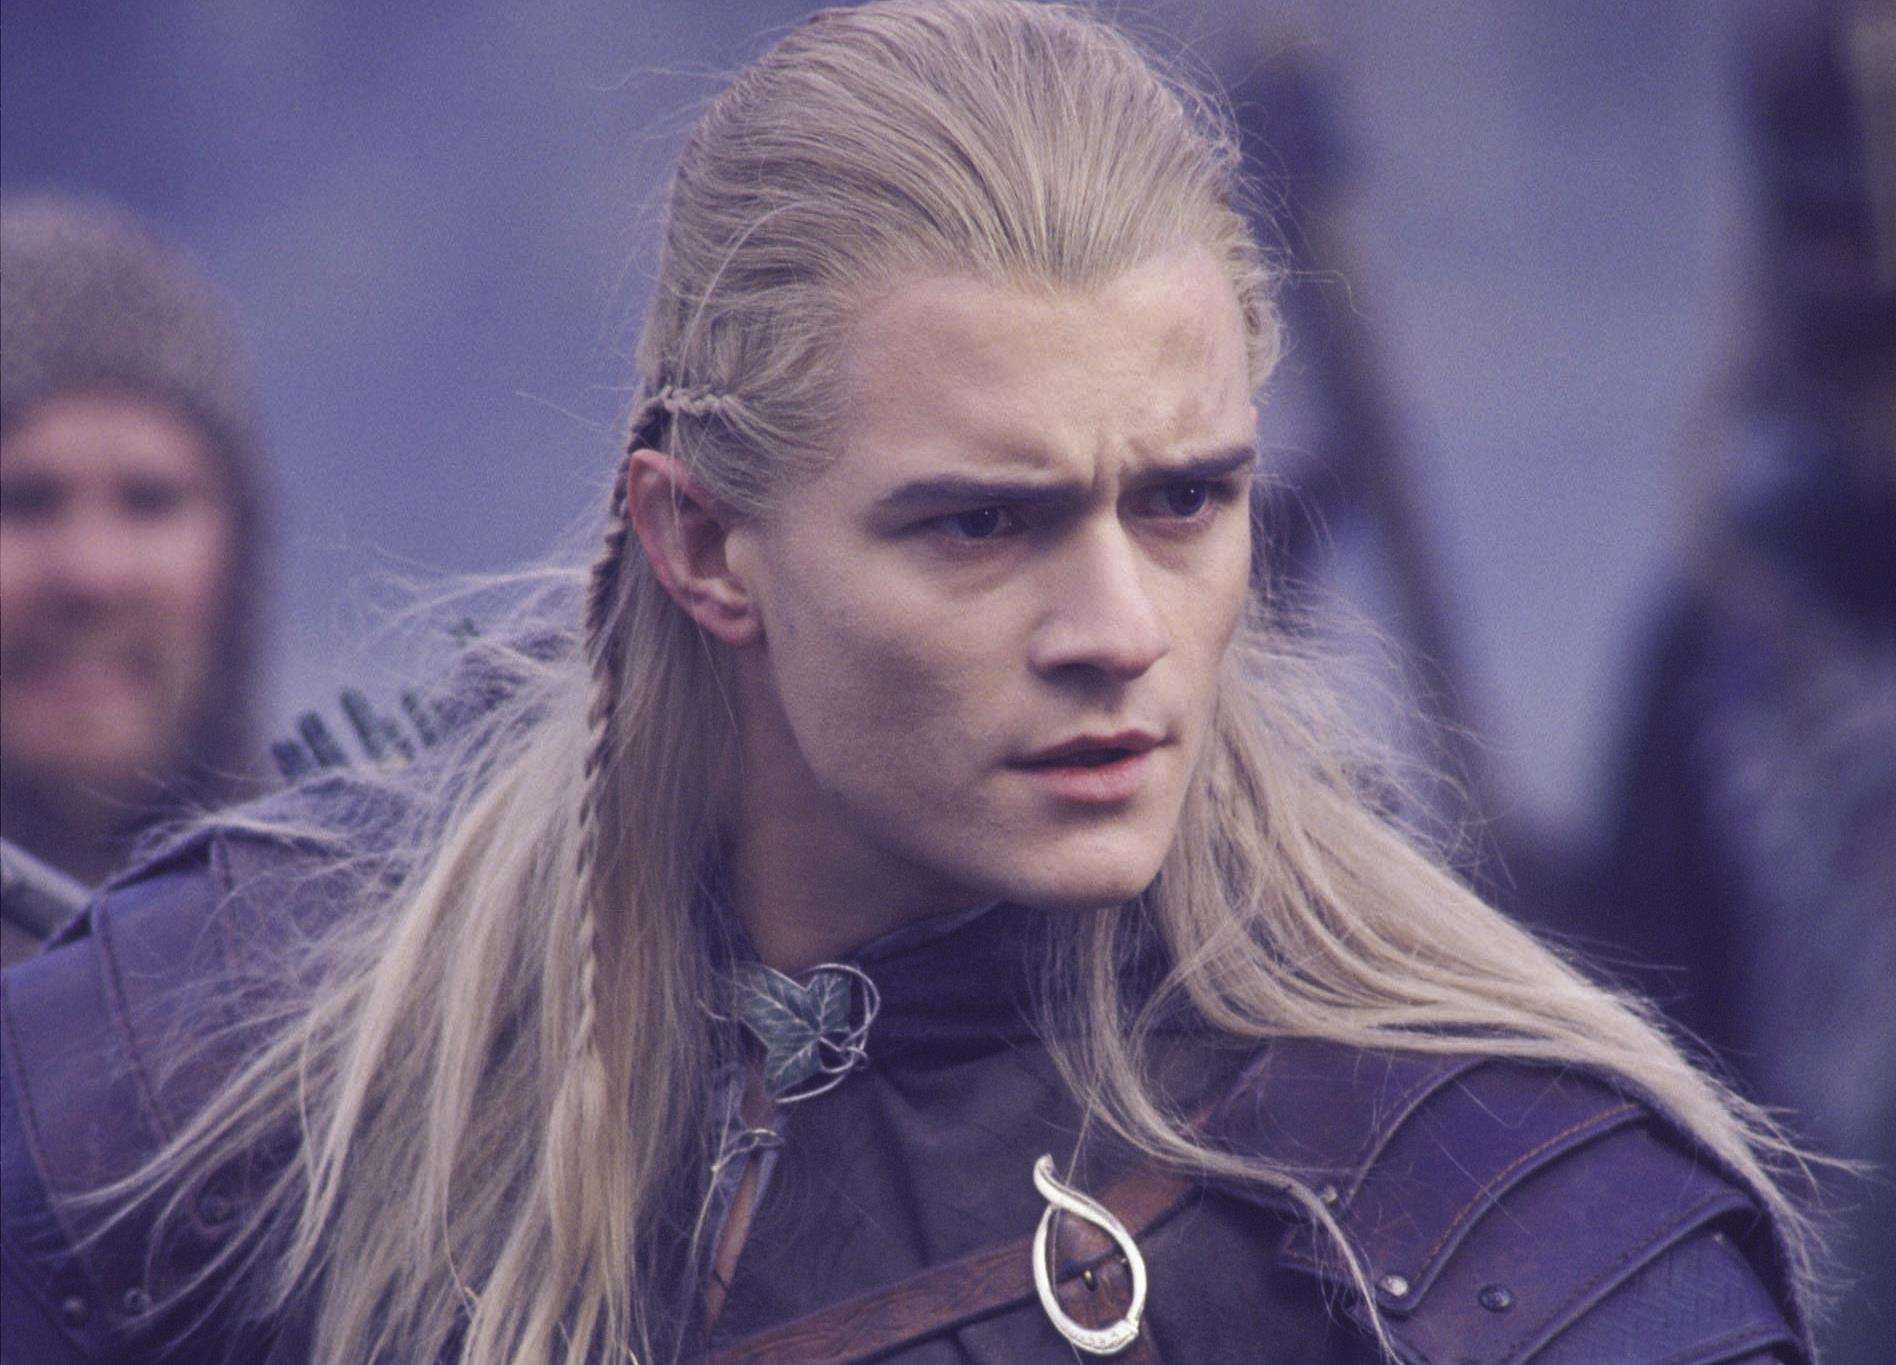 Orlando Bloom starred in Lord of the Rings